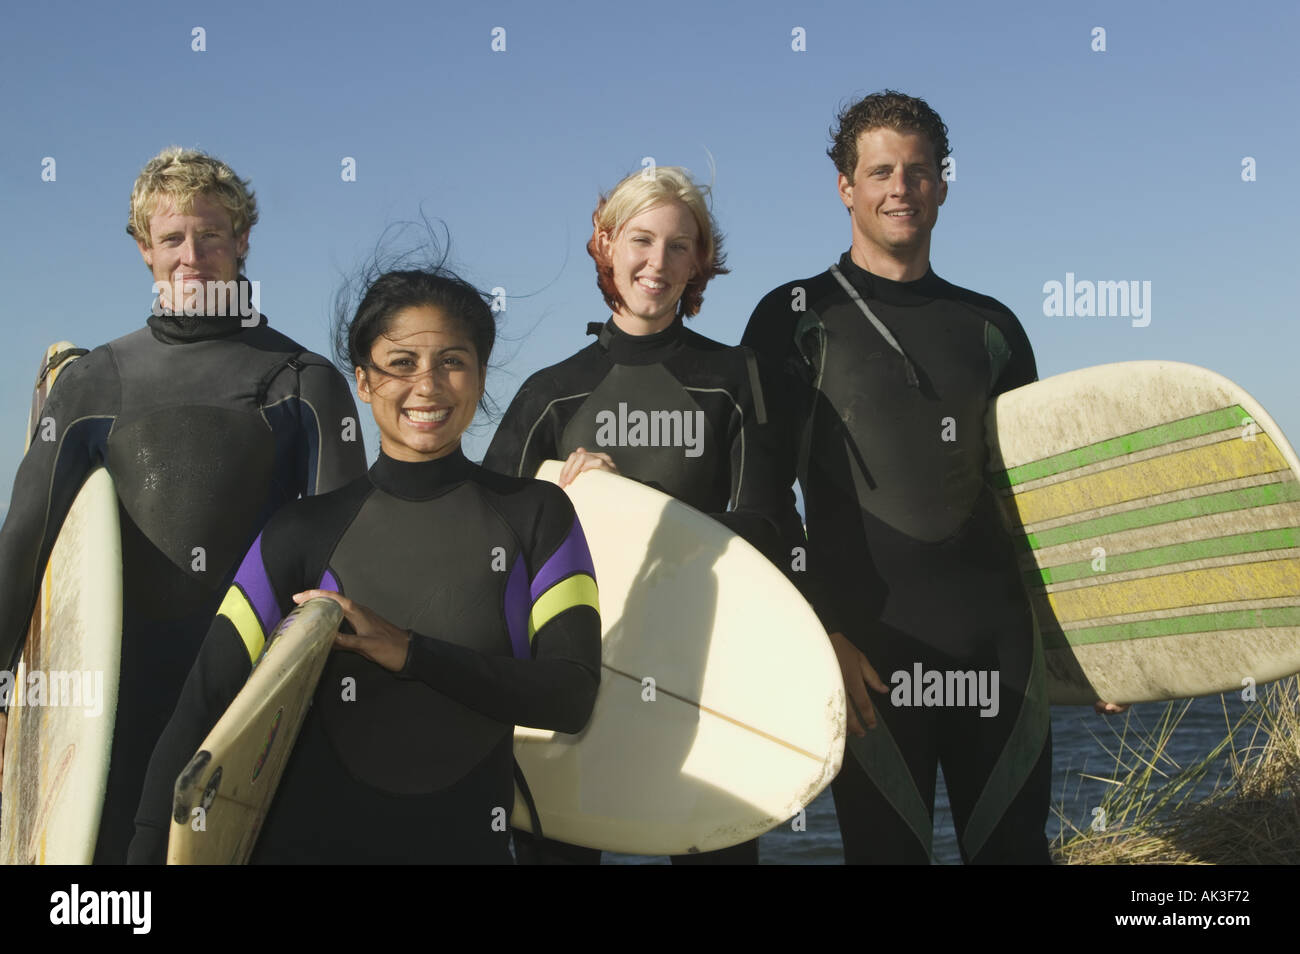 Portrait of four surfers in wetsuits Stock Photo